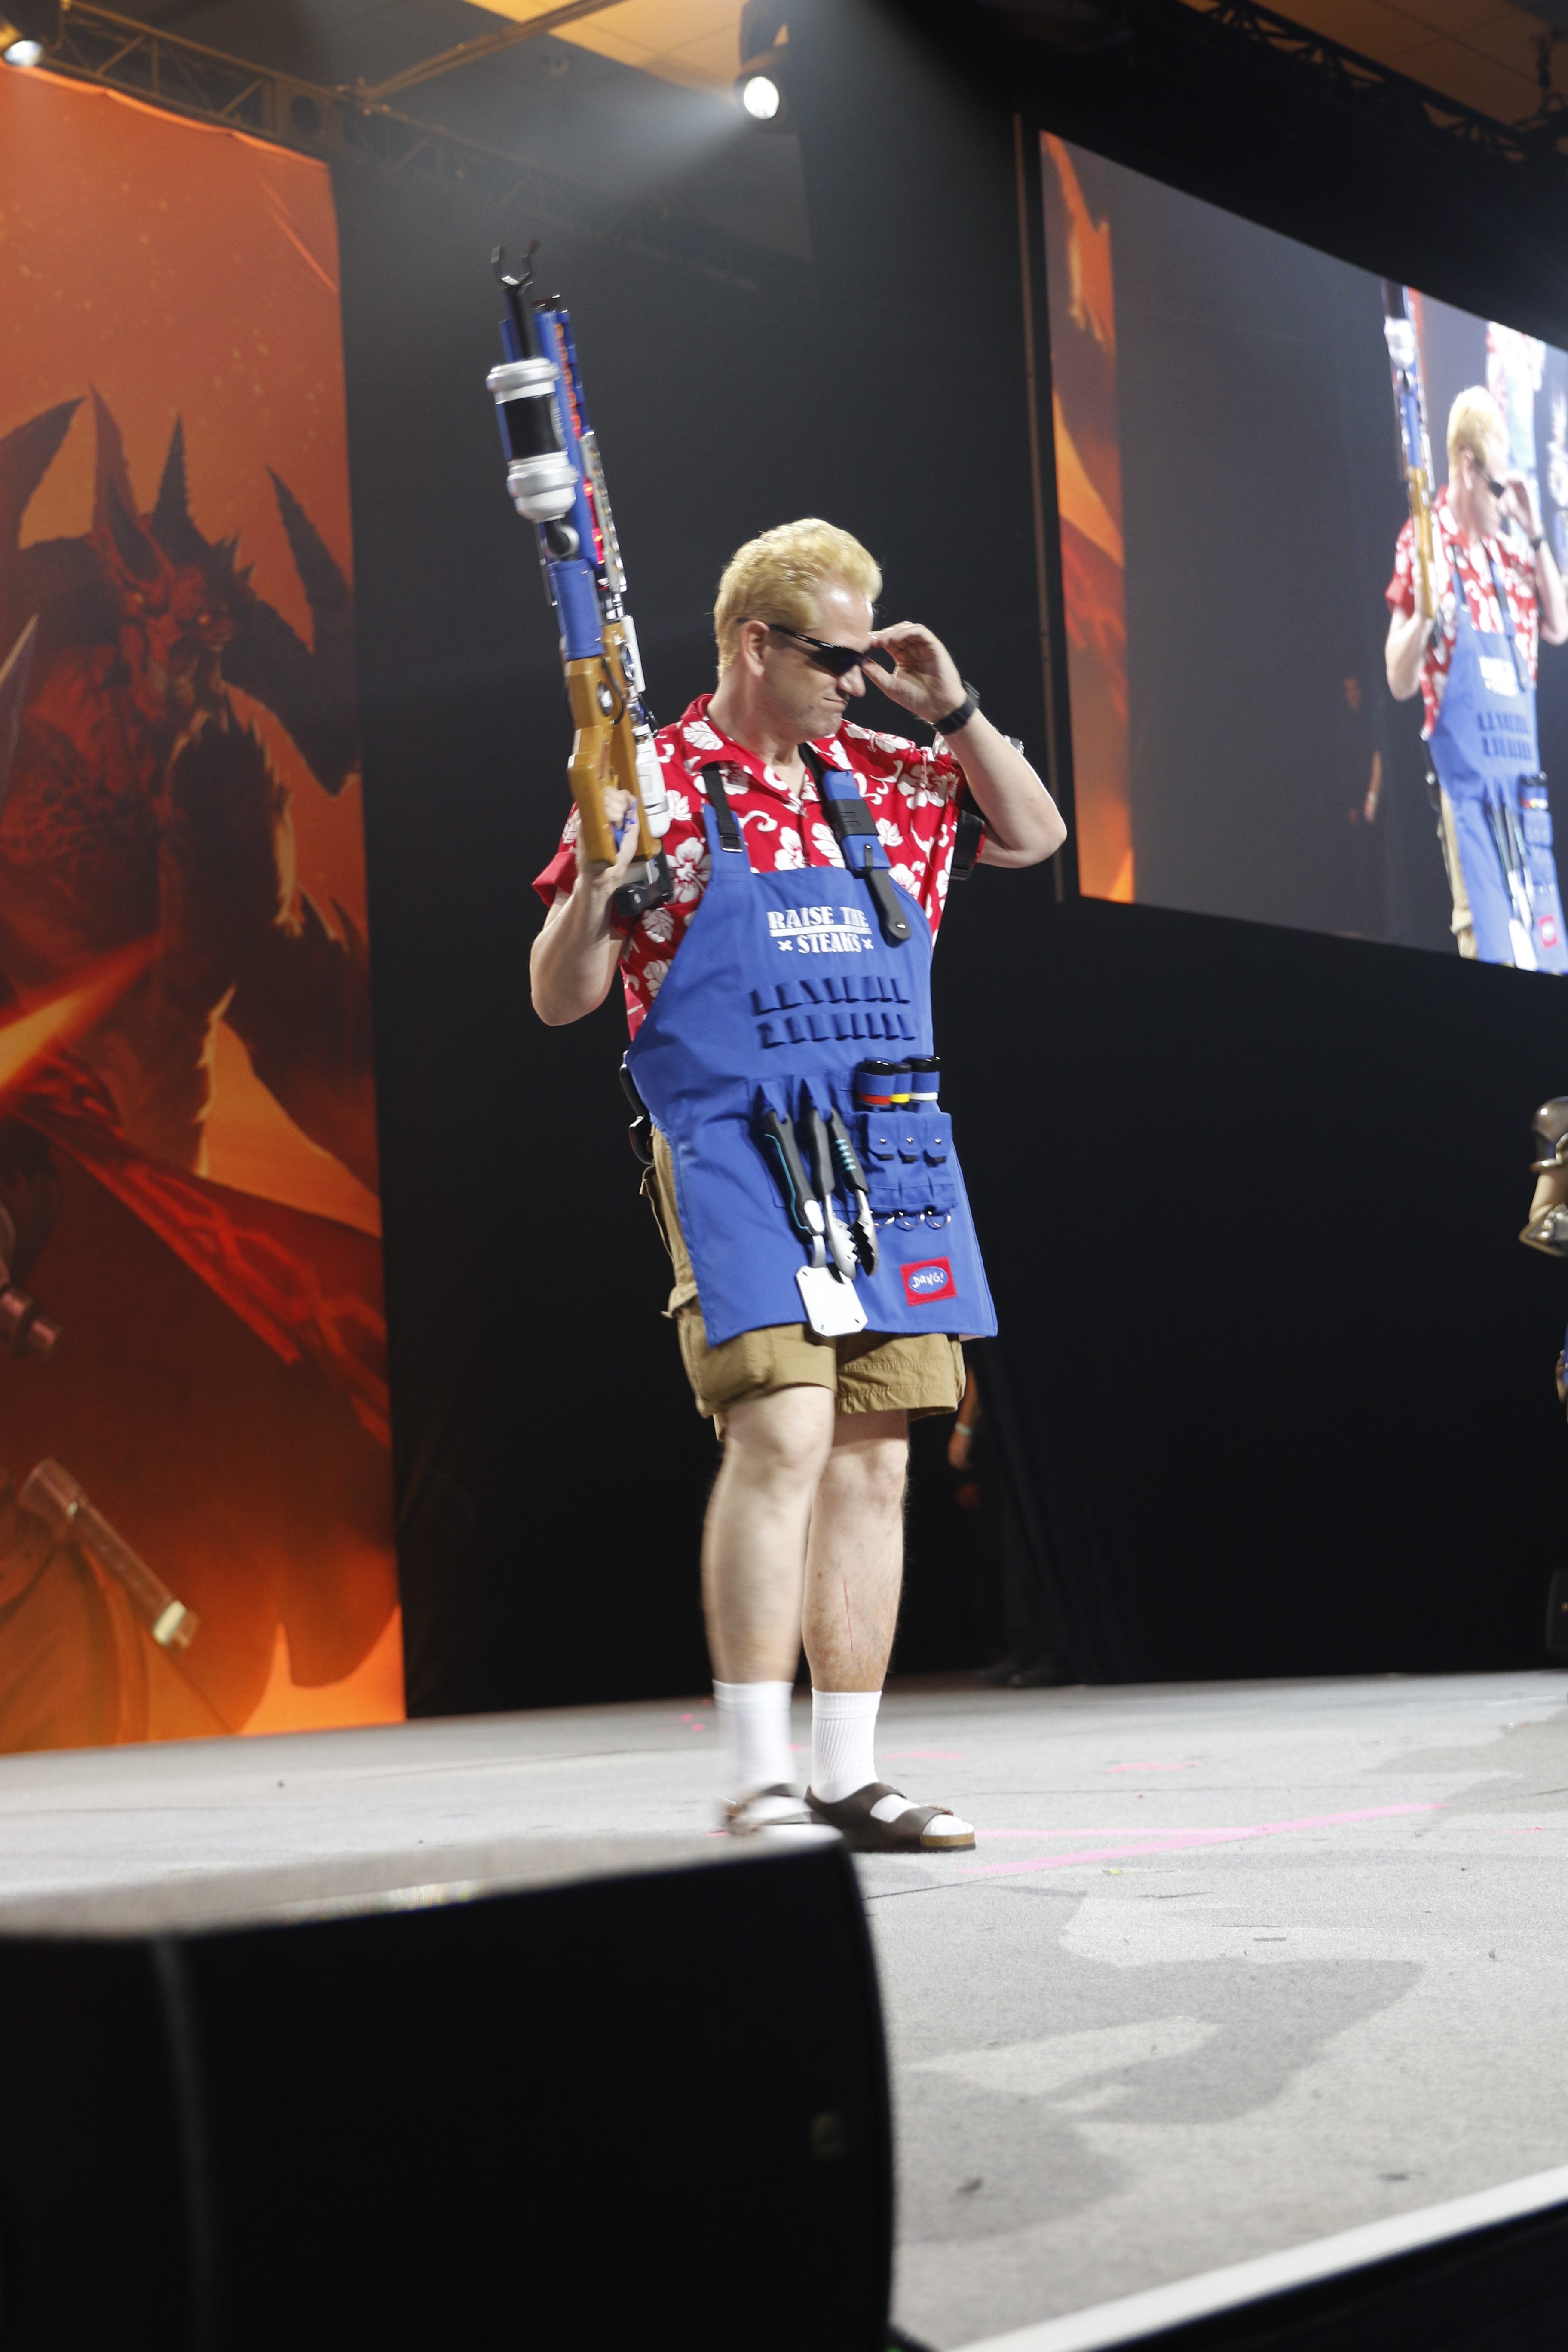 A man dressed as Grillmaster standing on stage